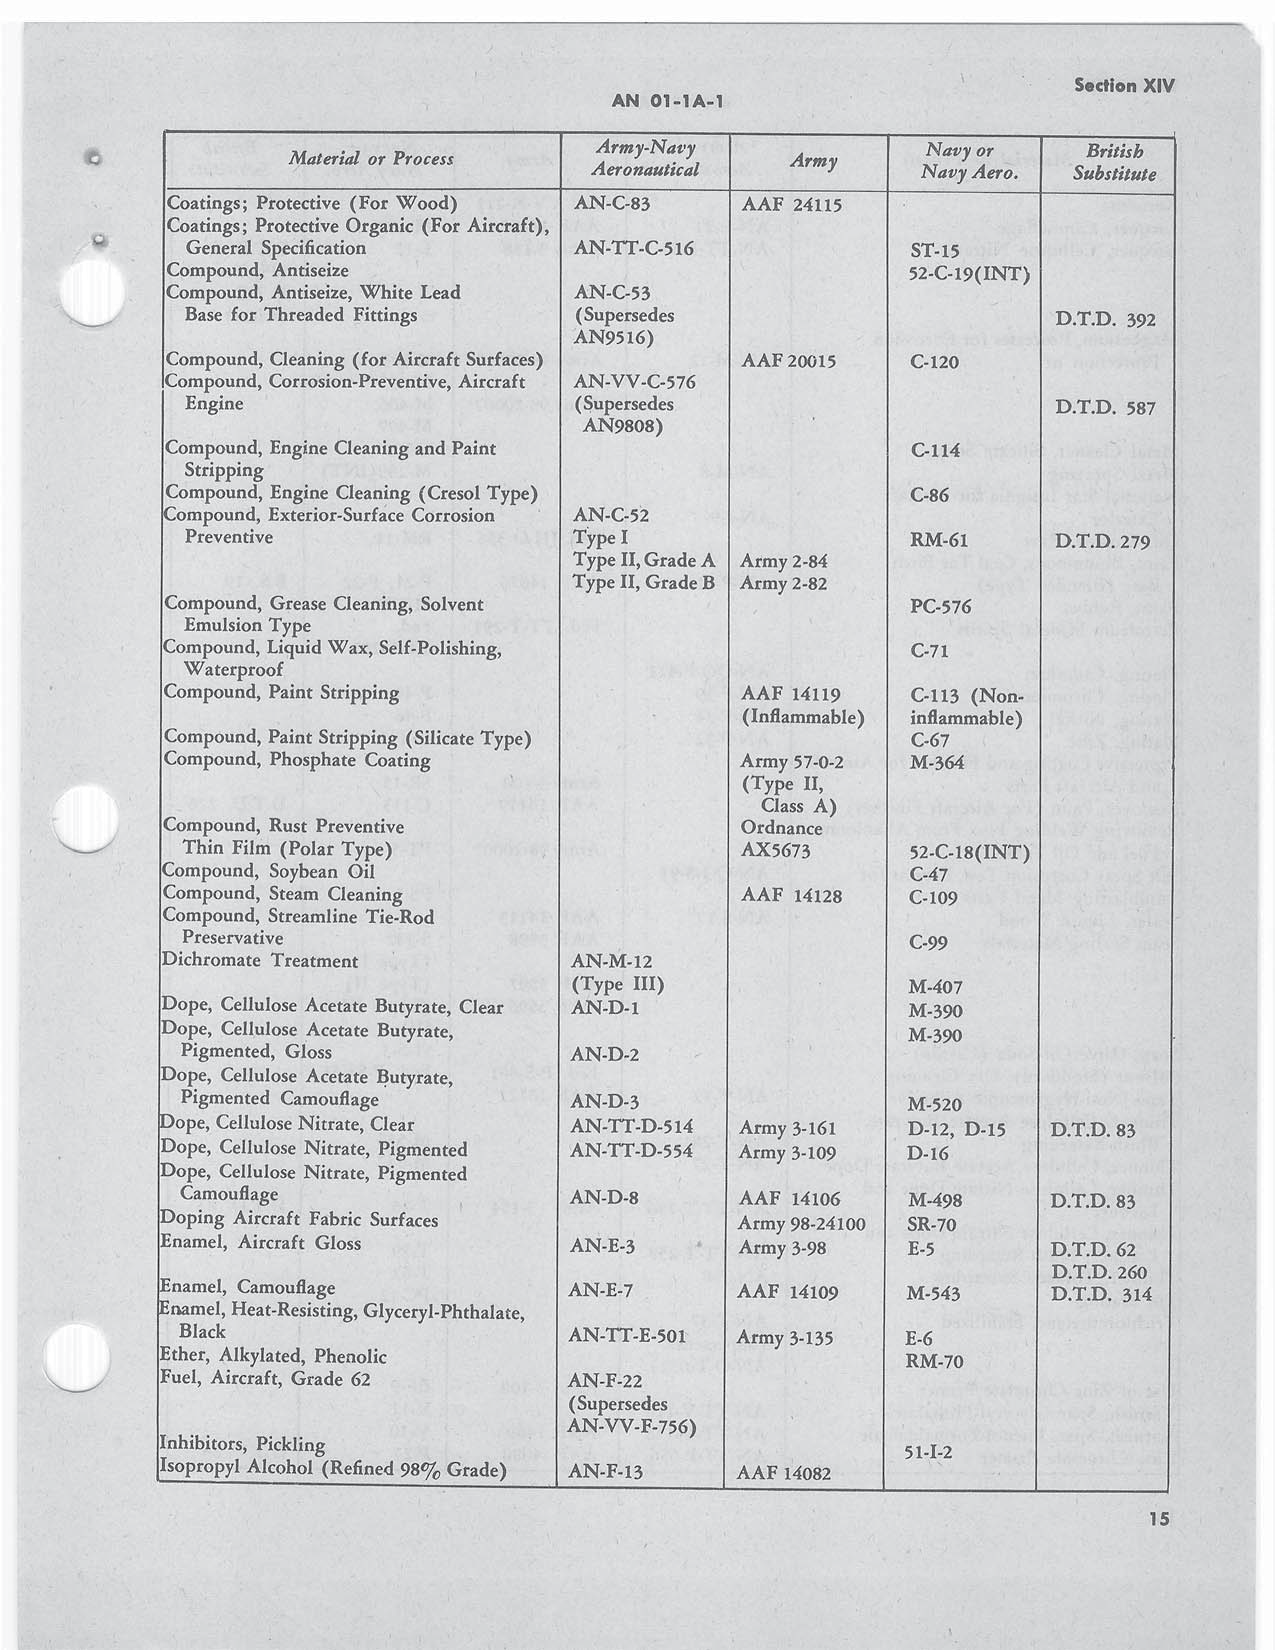 Sample page 215 from AirCorps Library document: General Manual for Structural Repair